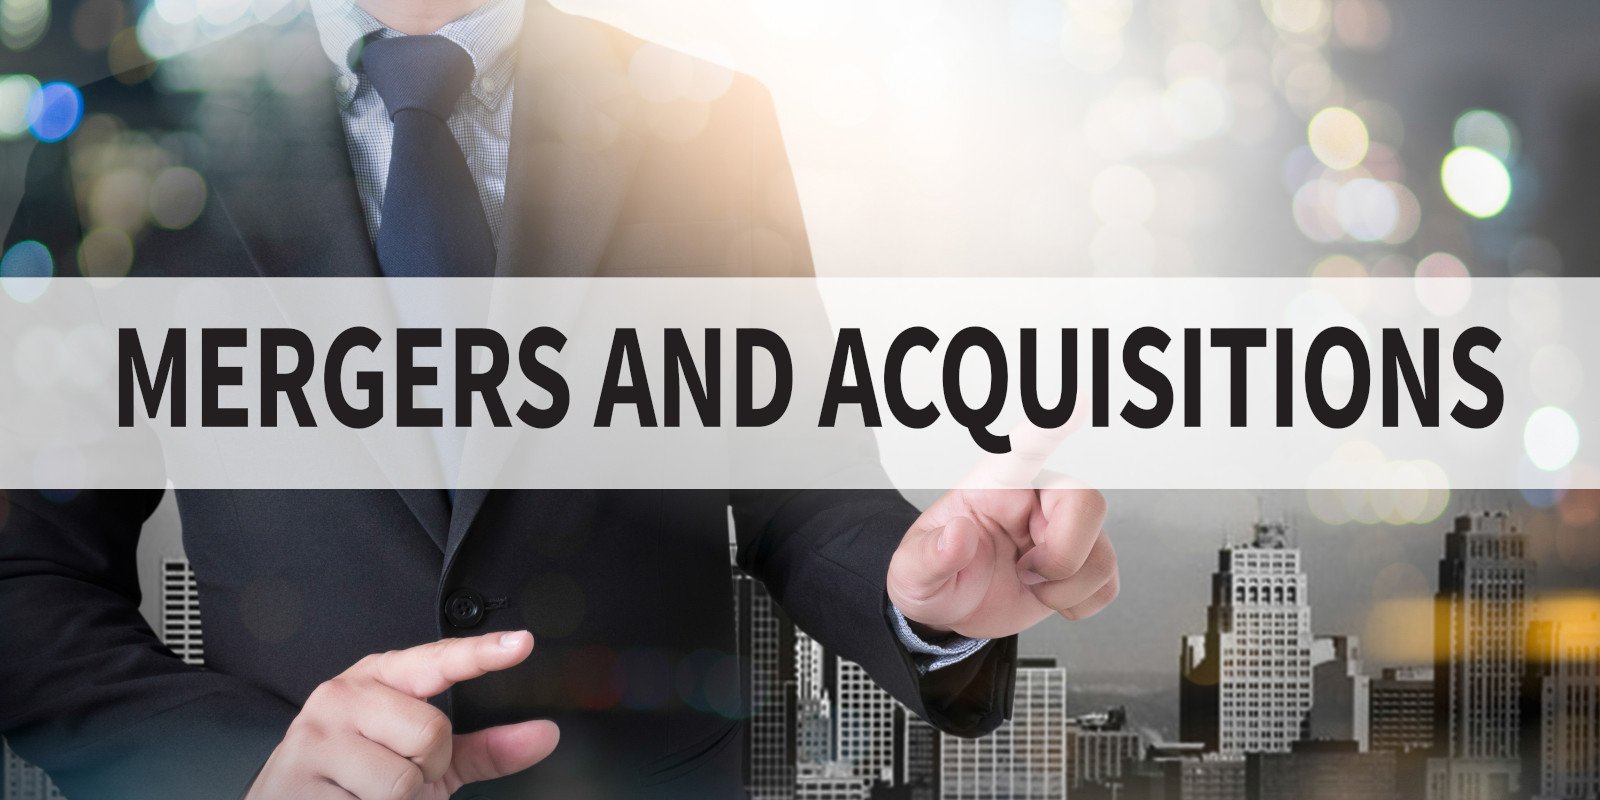 How To Make Mergers And Acquisitions Work For Your Business?